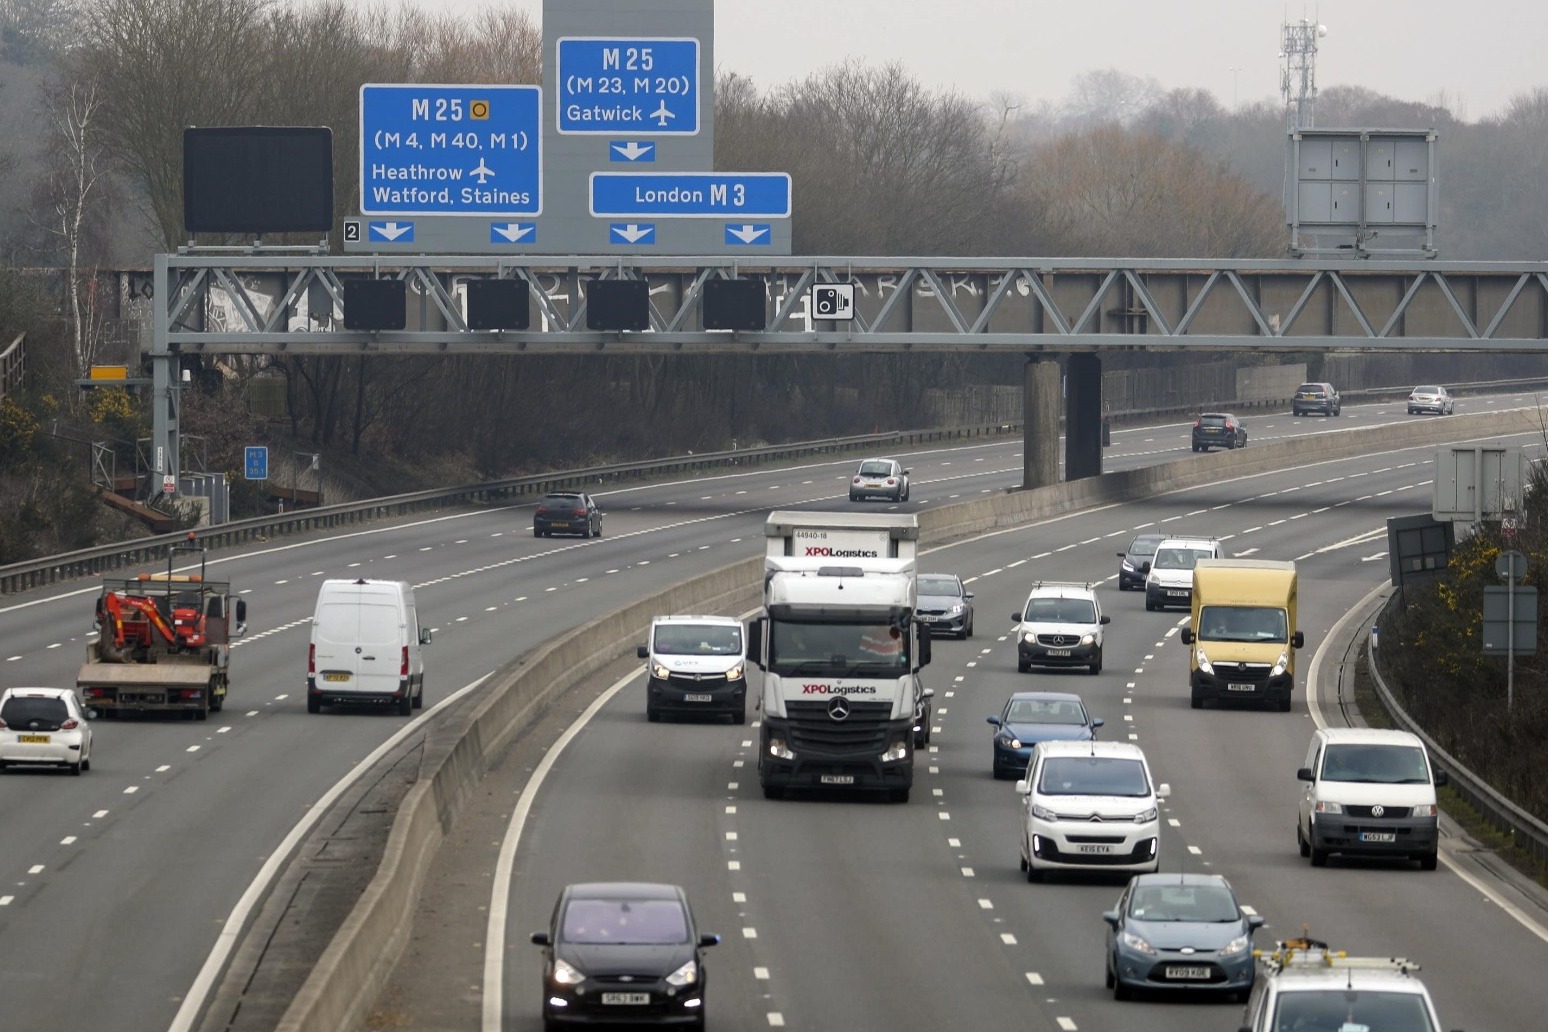 Rishi Sunak bans new smart motorways over concerns about safety and cost 